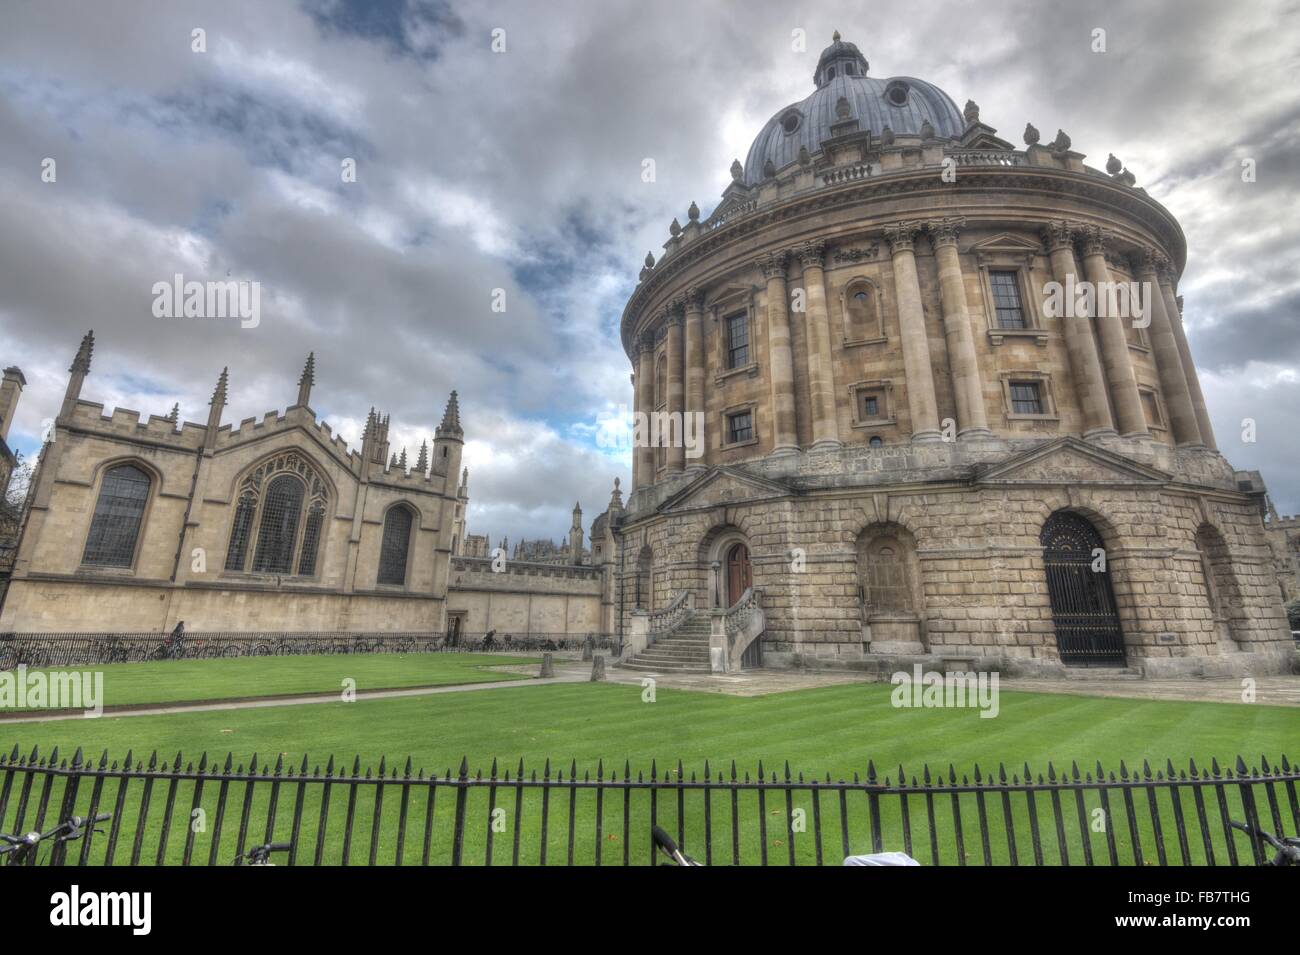 Radcliffe Square Oxford radcliffe camera Banque D'Images